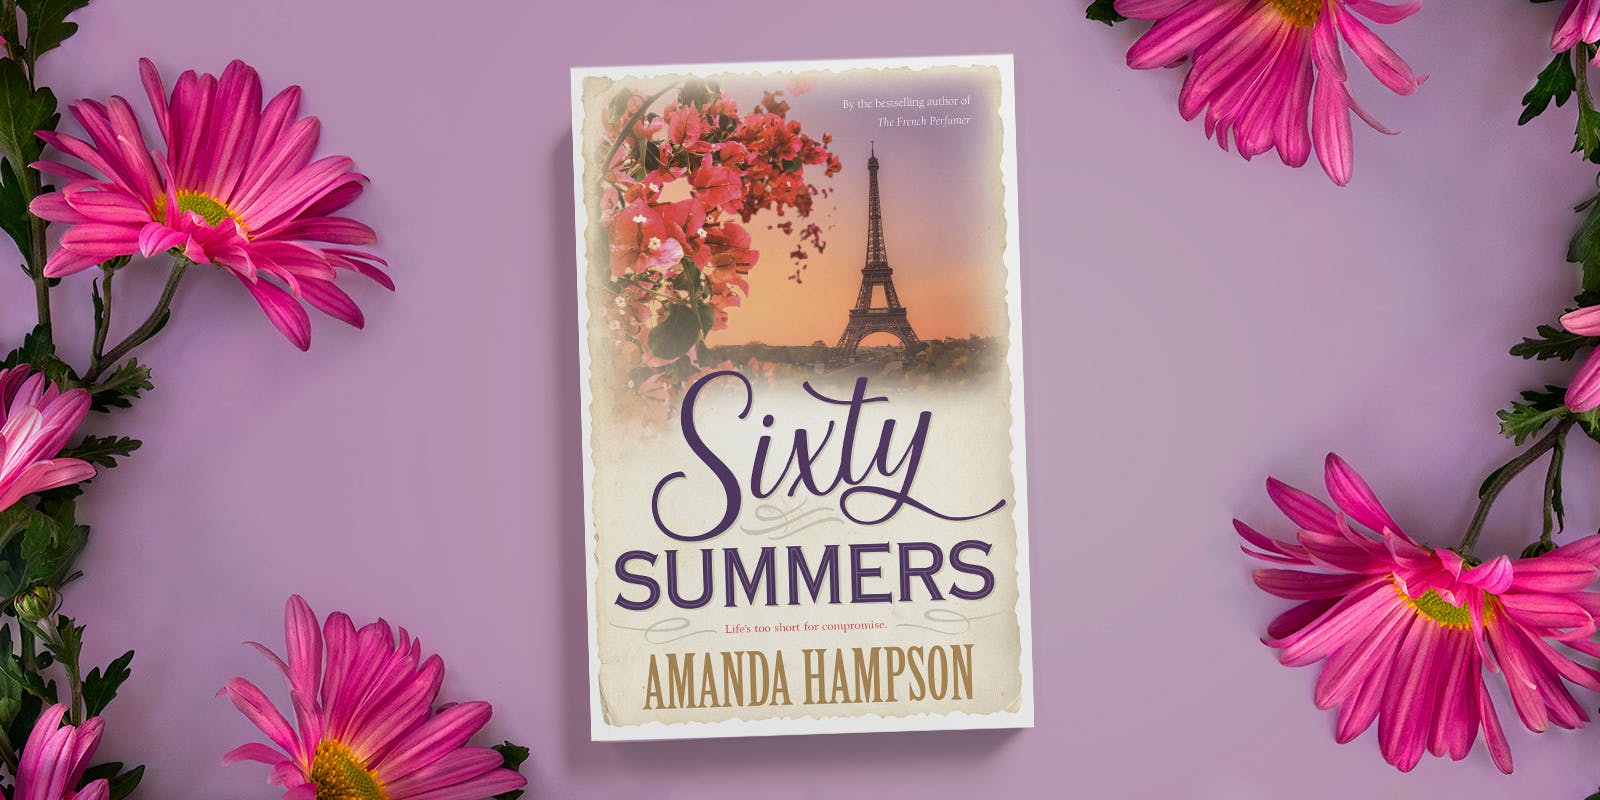 Sixty Summers book club notes